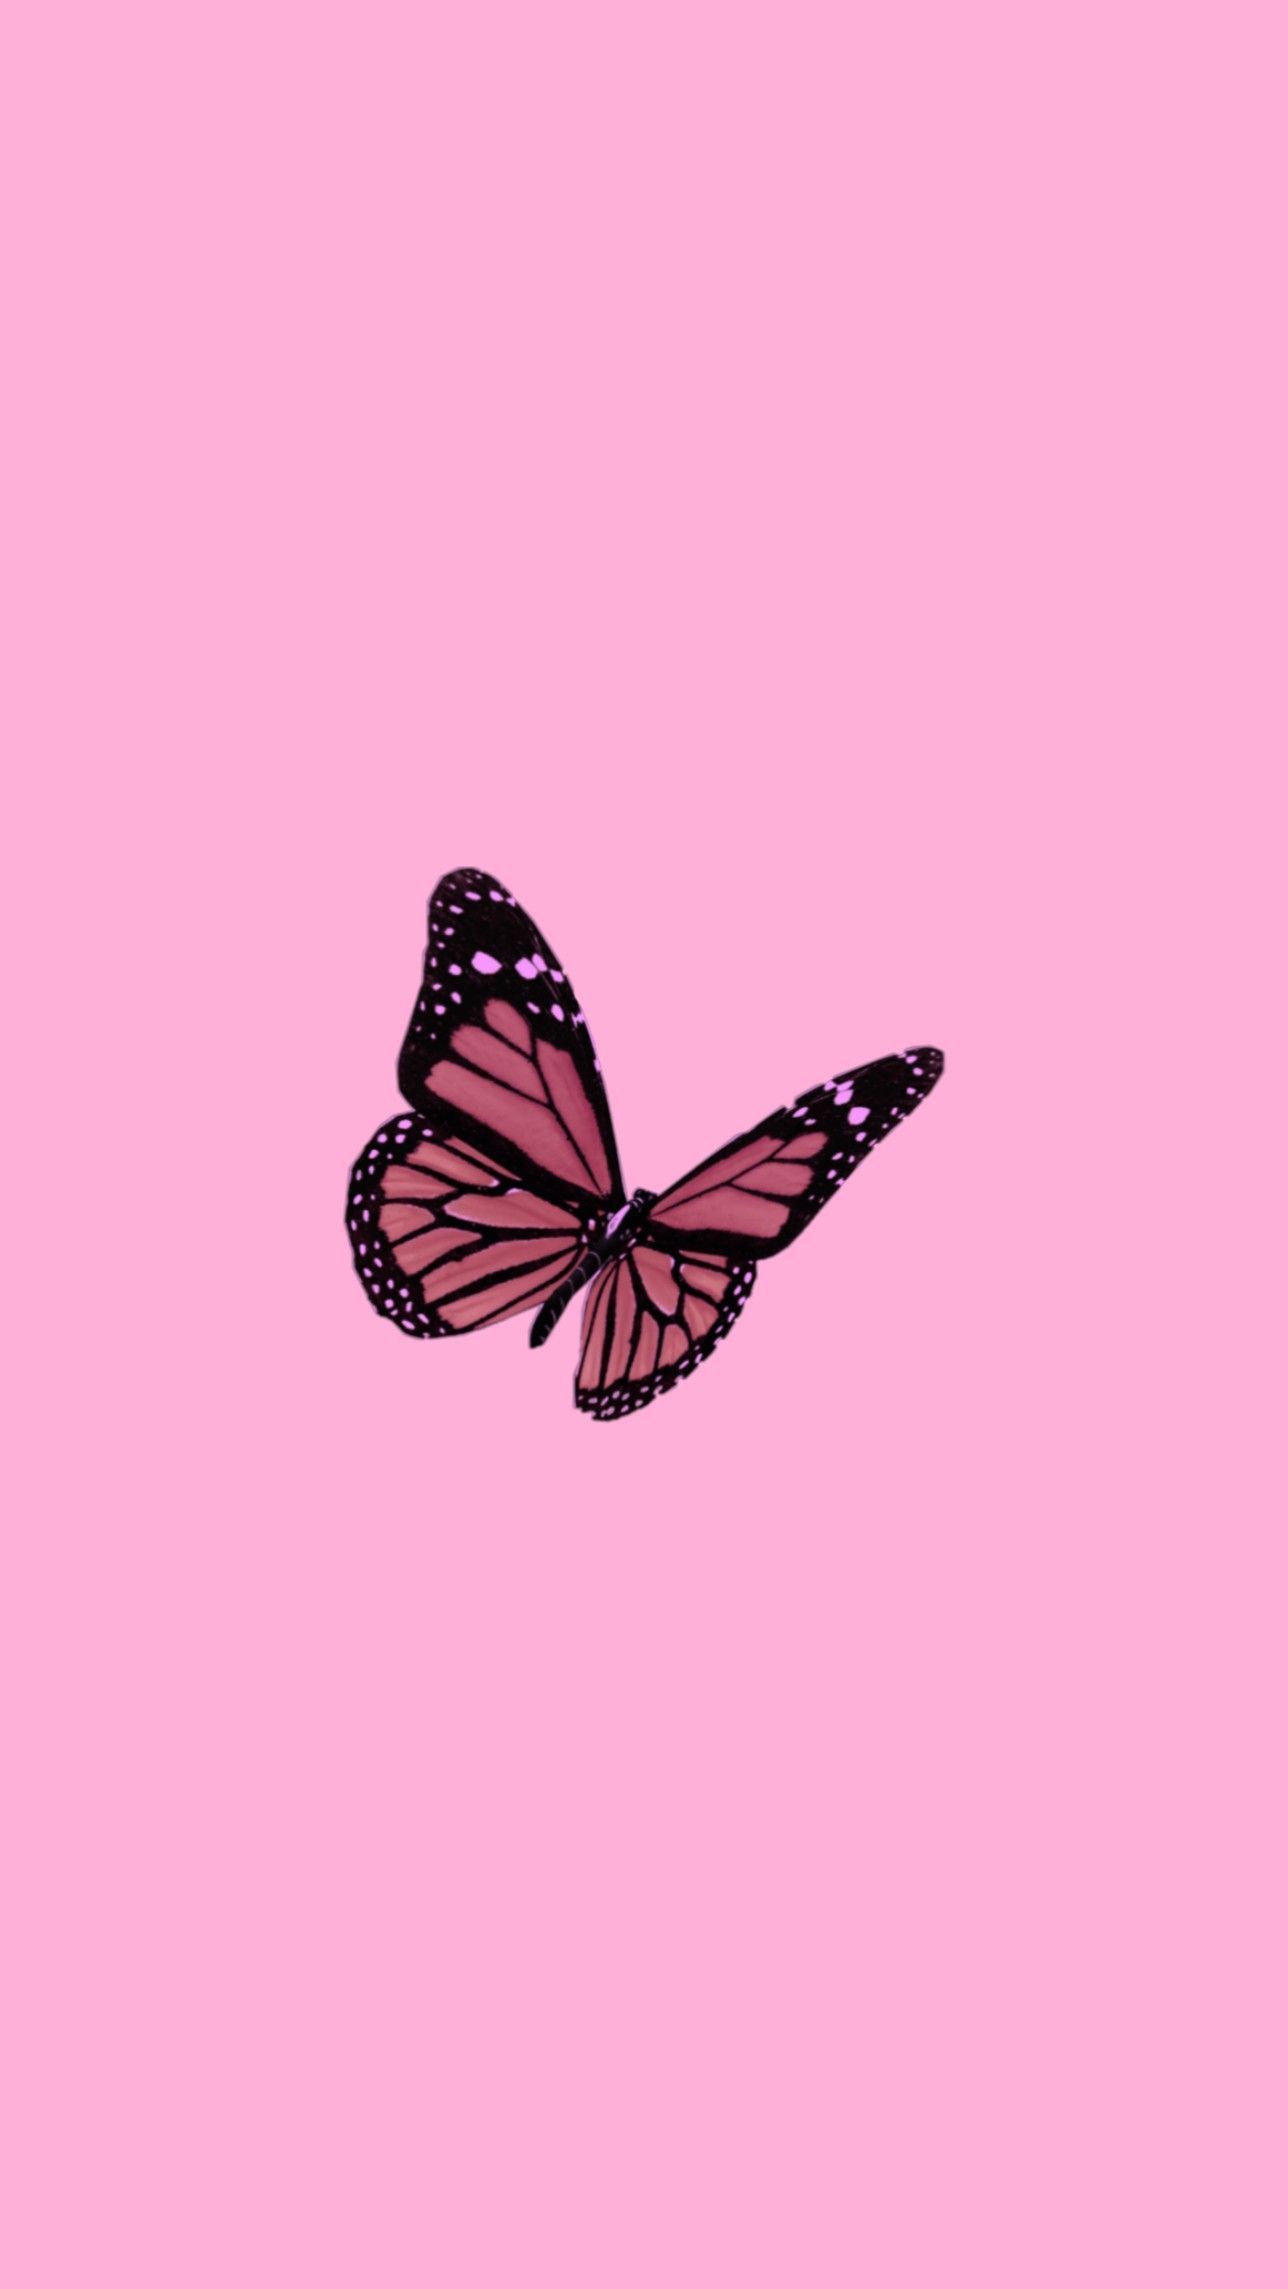 Aesthetic Butterfly Pictures Wallpapers - Wallpaper Cave